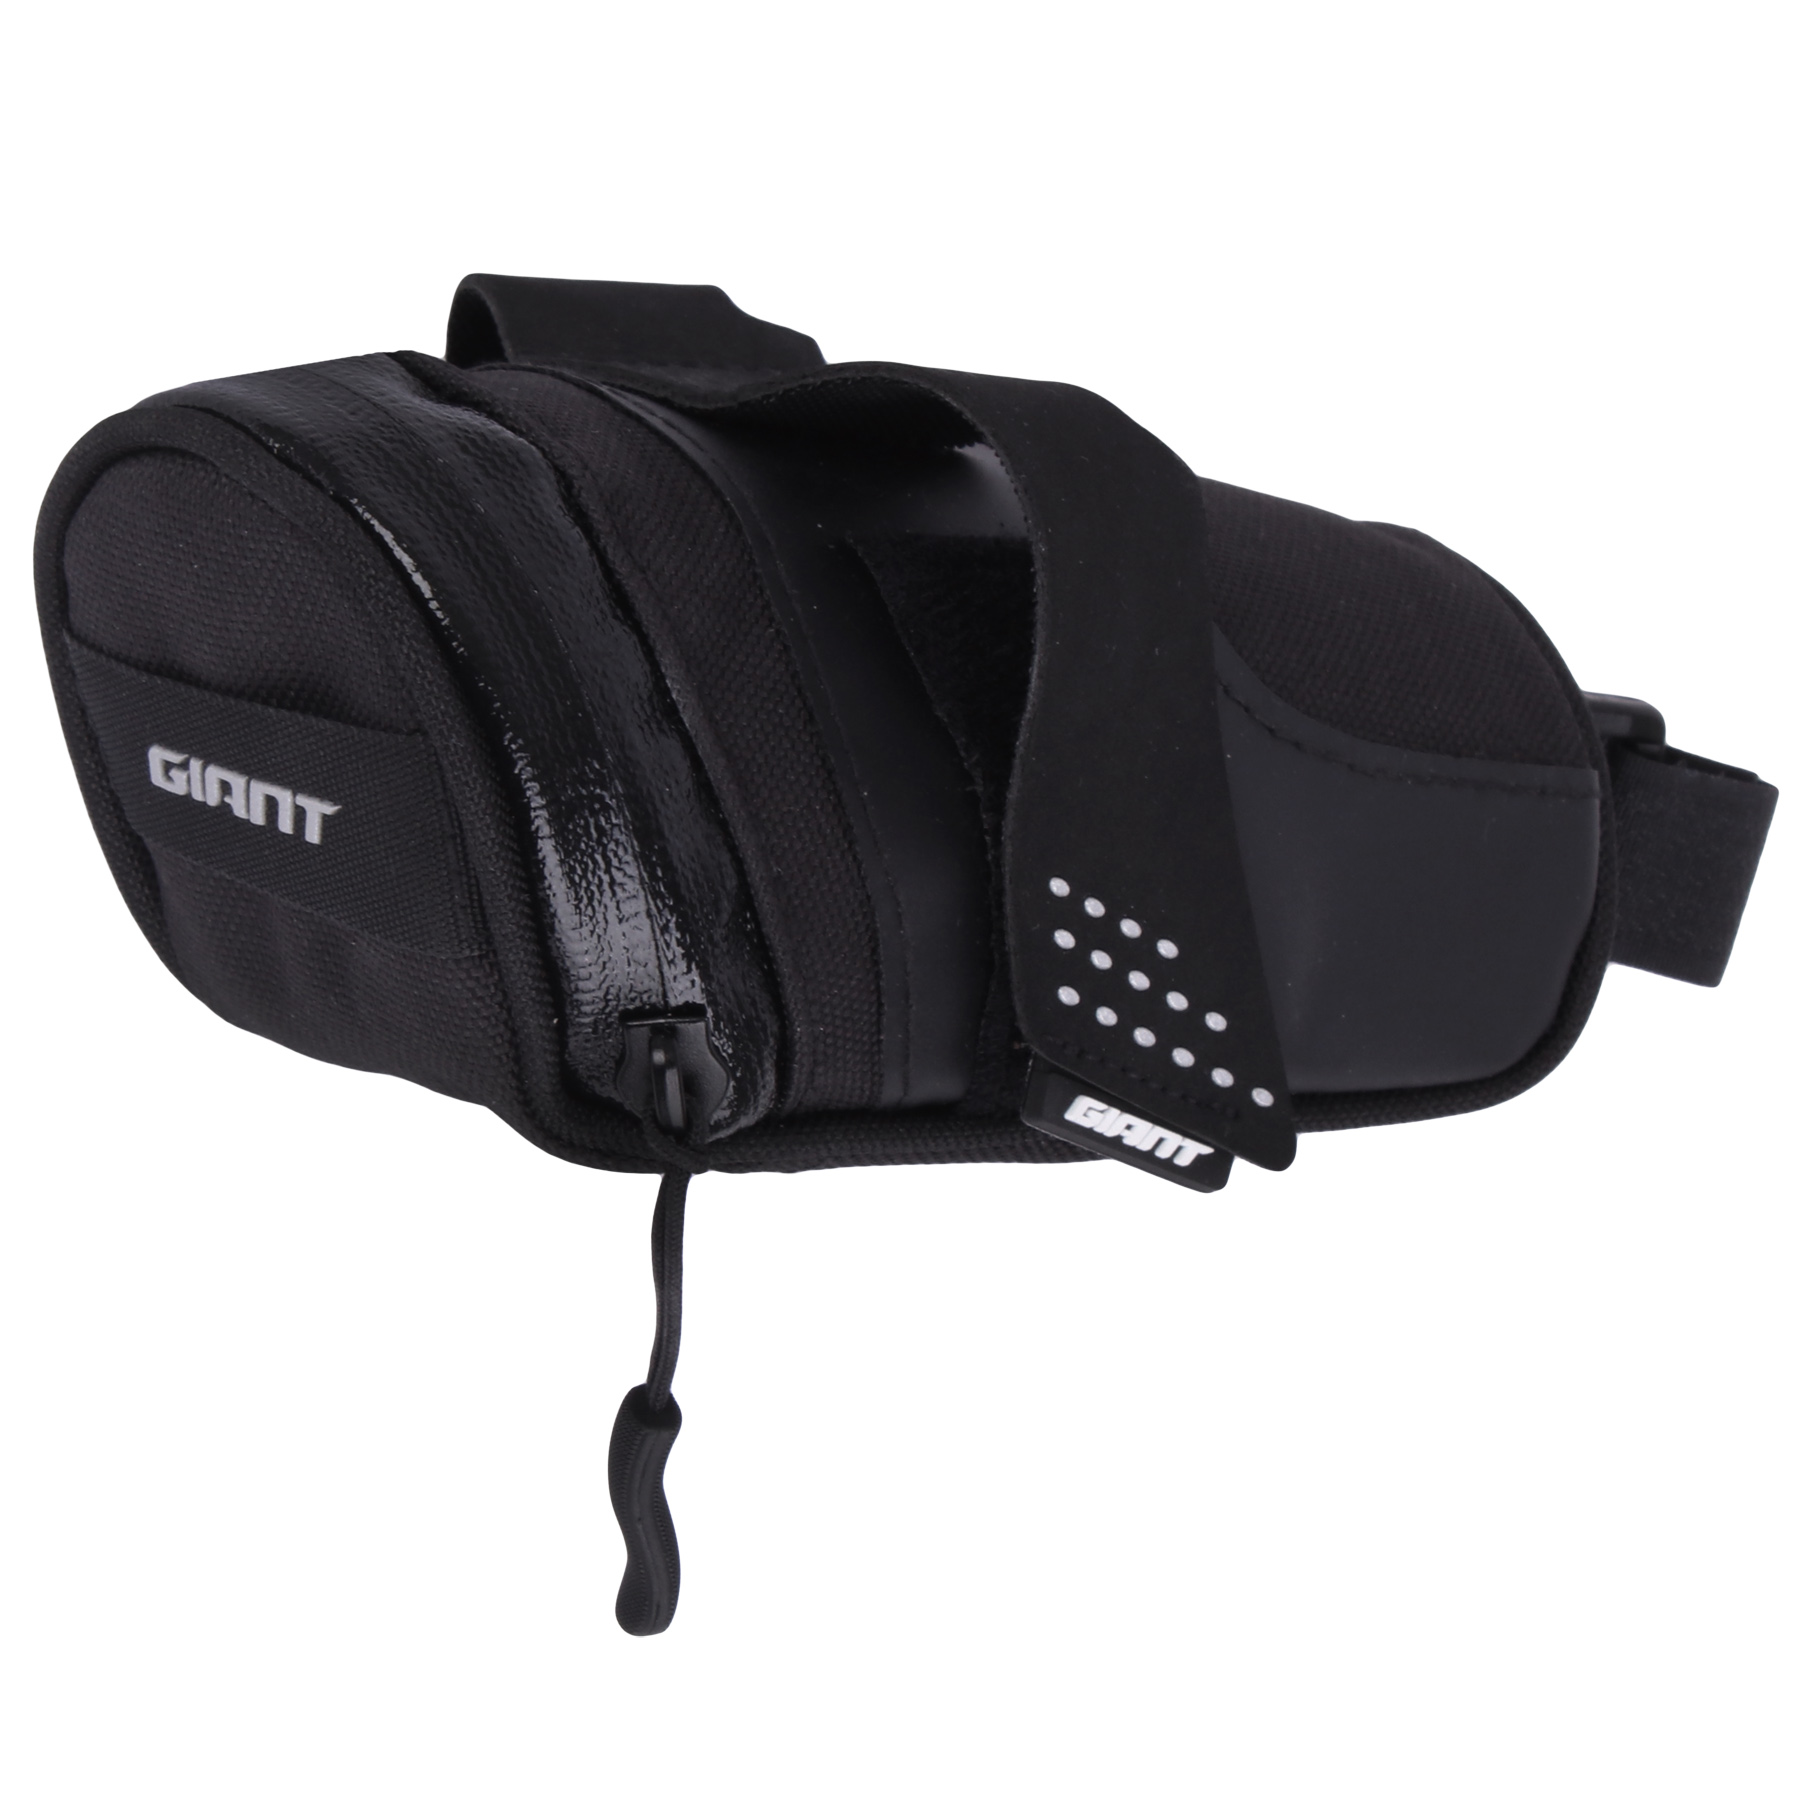 Picture of Giant Shadow DX Seat Bag S